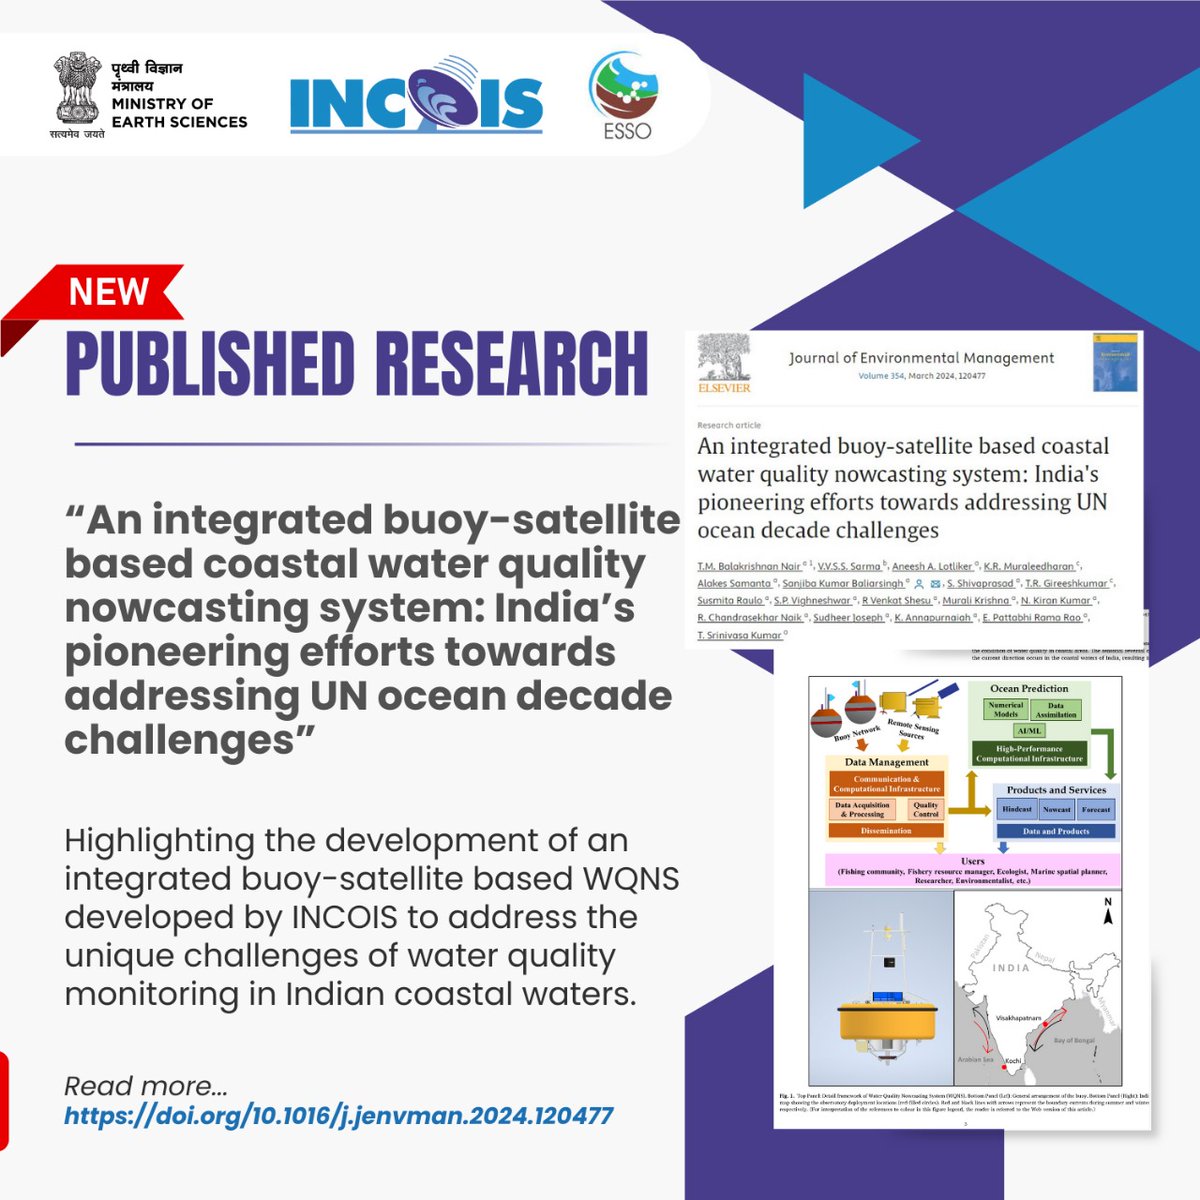 Congratulations to Dr. Balakrishnan Nair & the team behind this #ResearchArticle, which marks a notable achievement in India's initiatives to address the challenges highlighted by the #UNOceanDecade. It also emphasises the innovative approaches in monitoring #CoastalWater quality